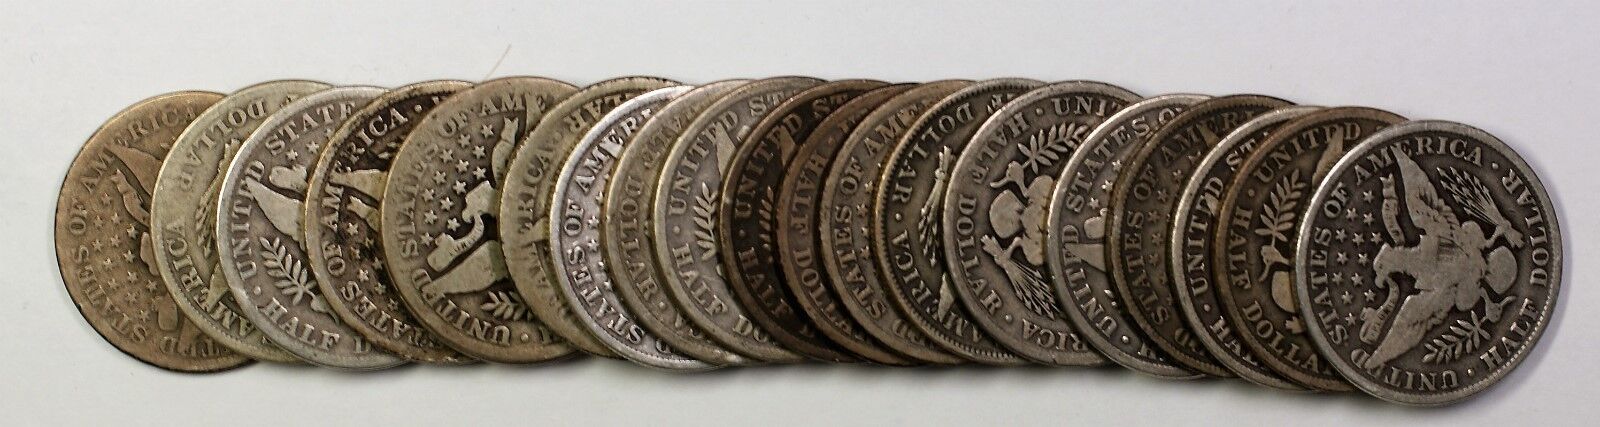 1912 Barber Half Dollar 50c Roll 20 Circulated 90% Old Silver Coins Lot